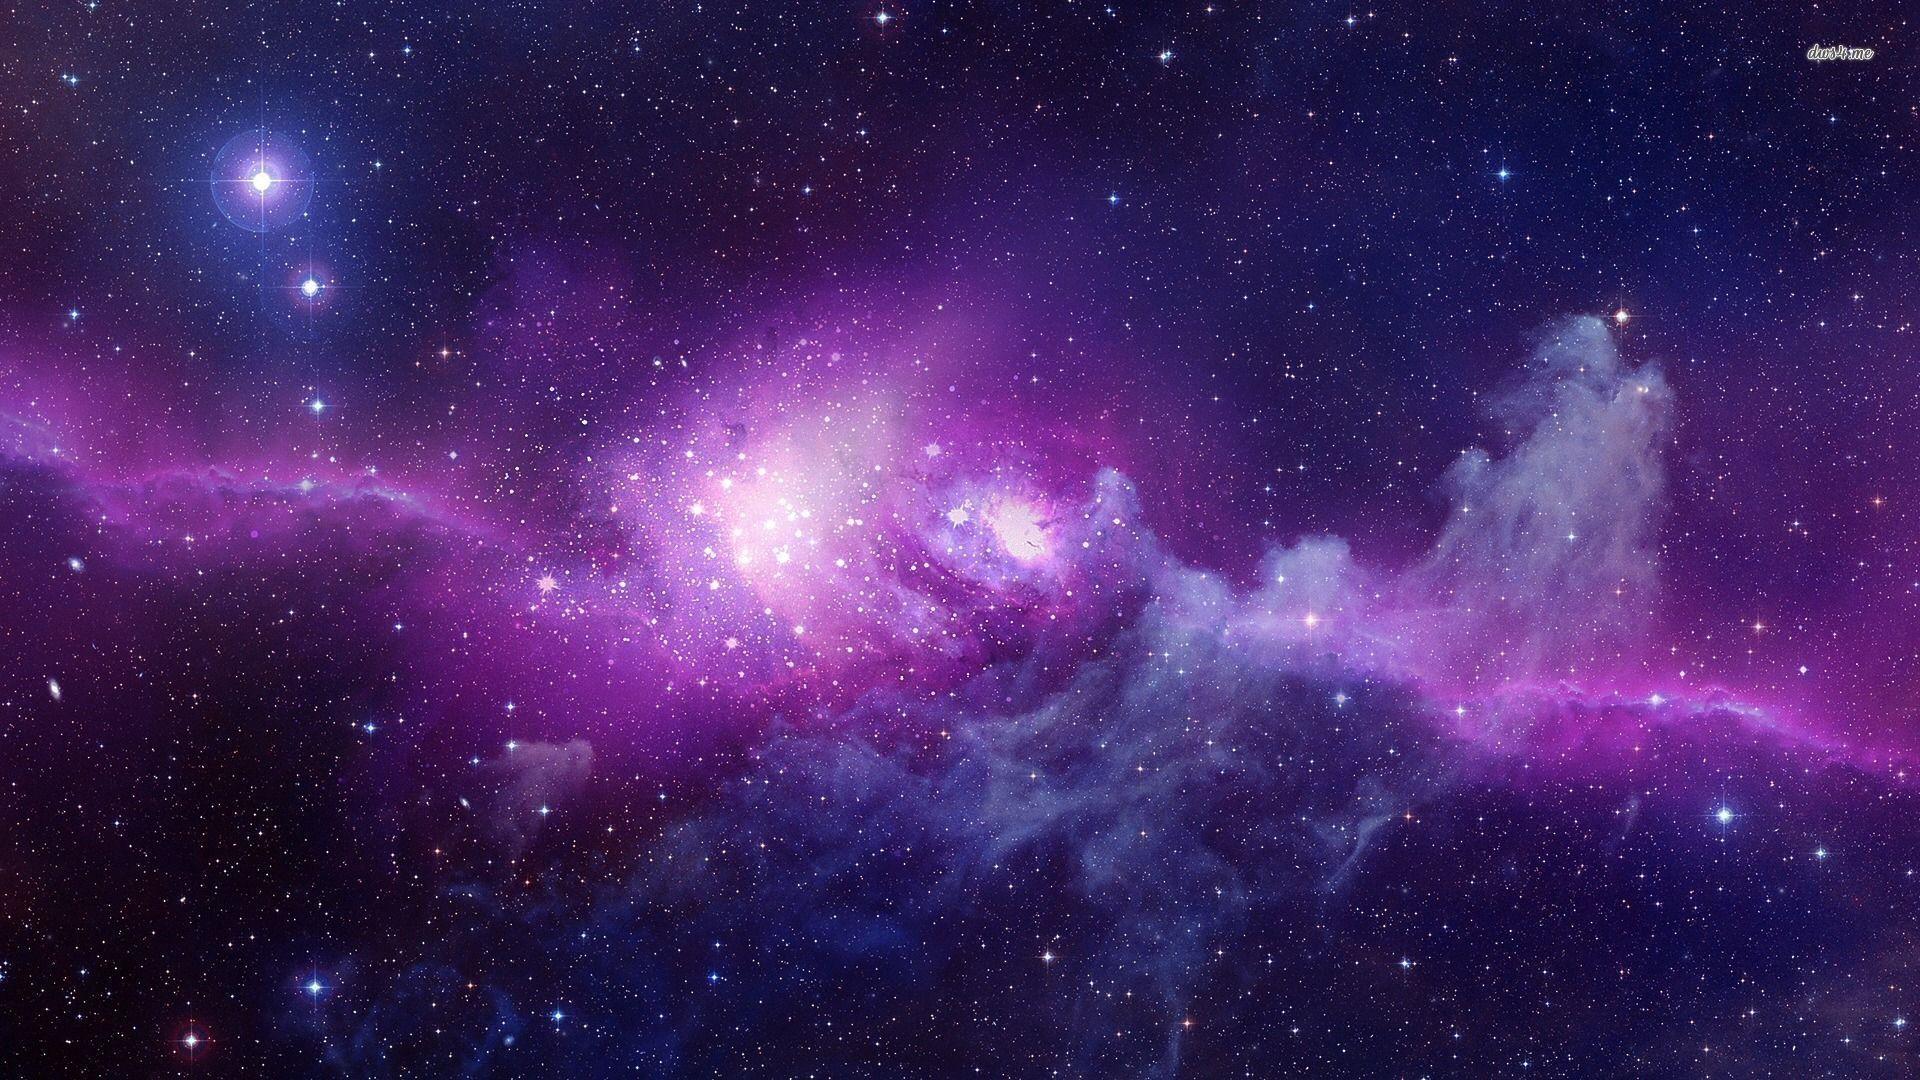 Purple And Blue Galaxy Wallpapers - Wallpaper Cave